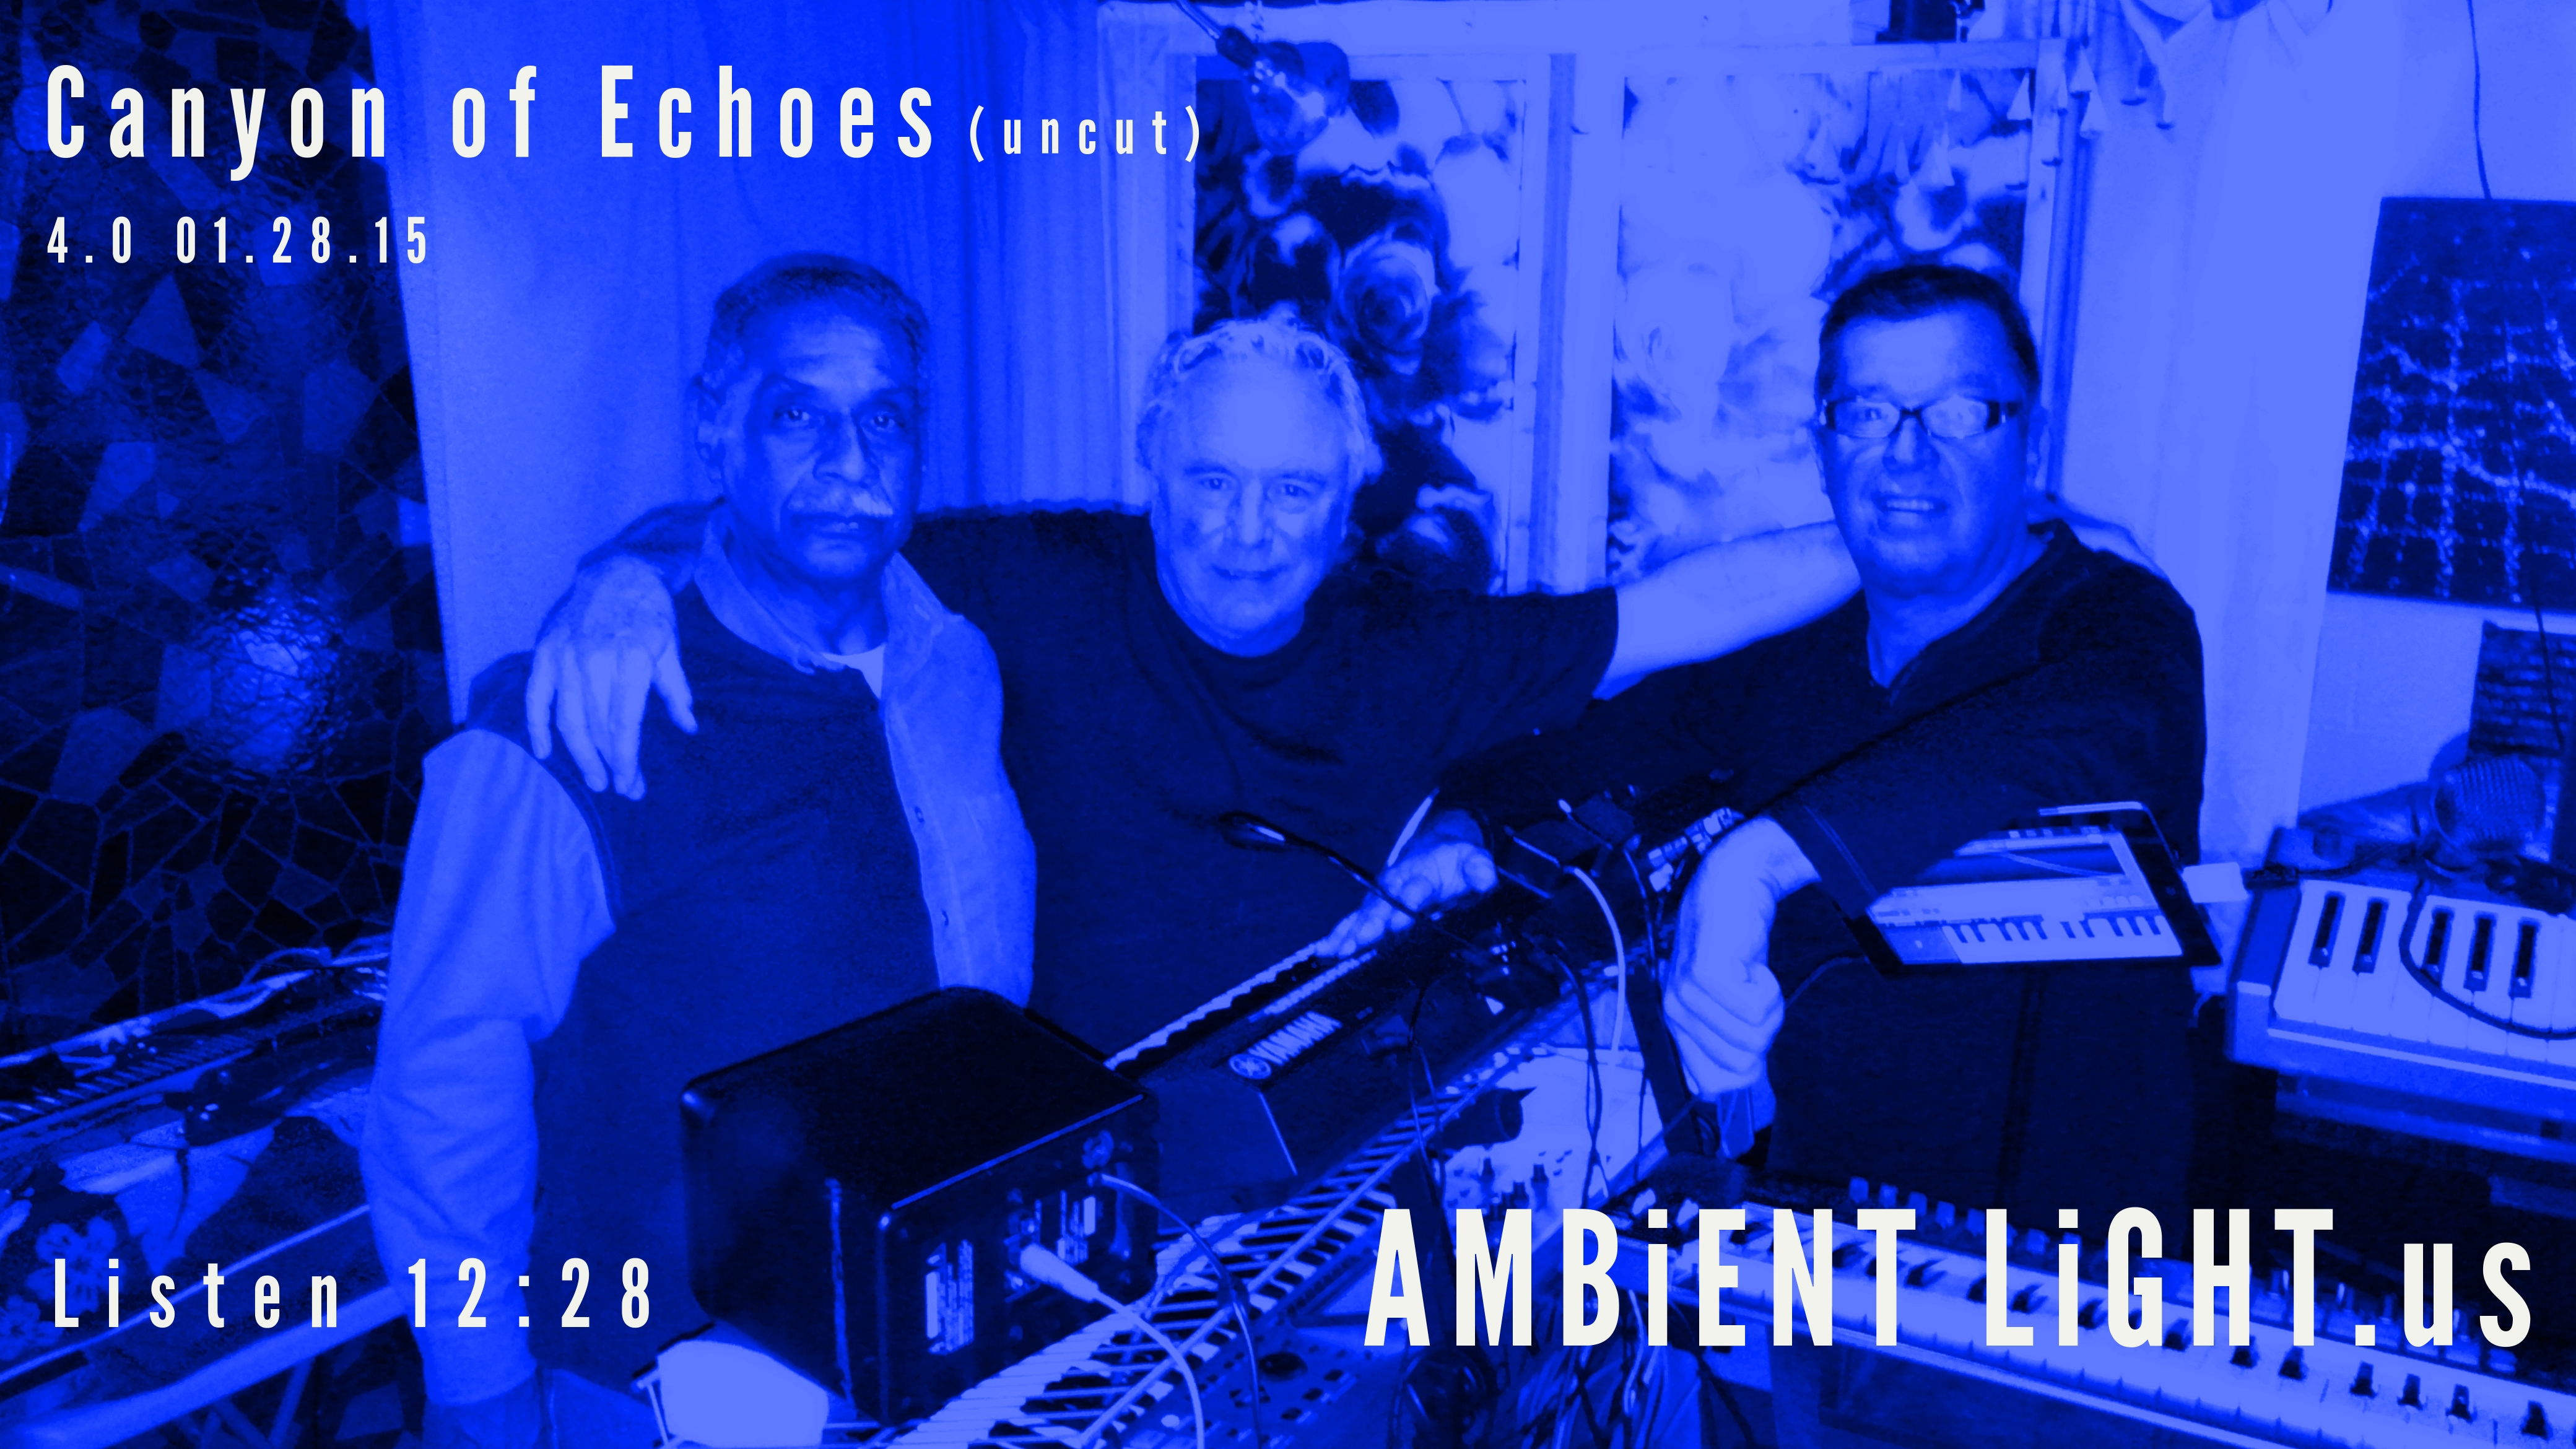 AL Canyon of Echoes 4.0 01.28.15